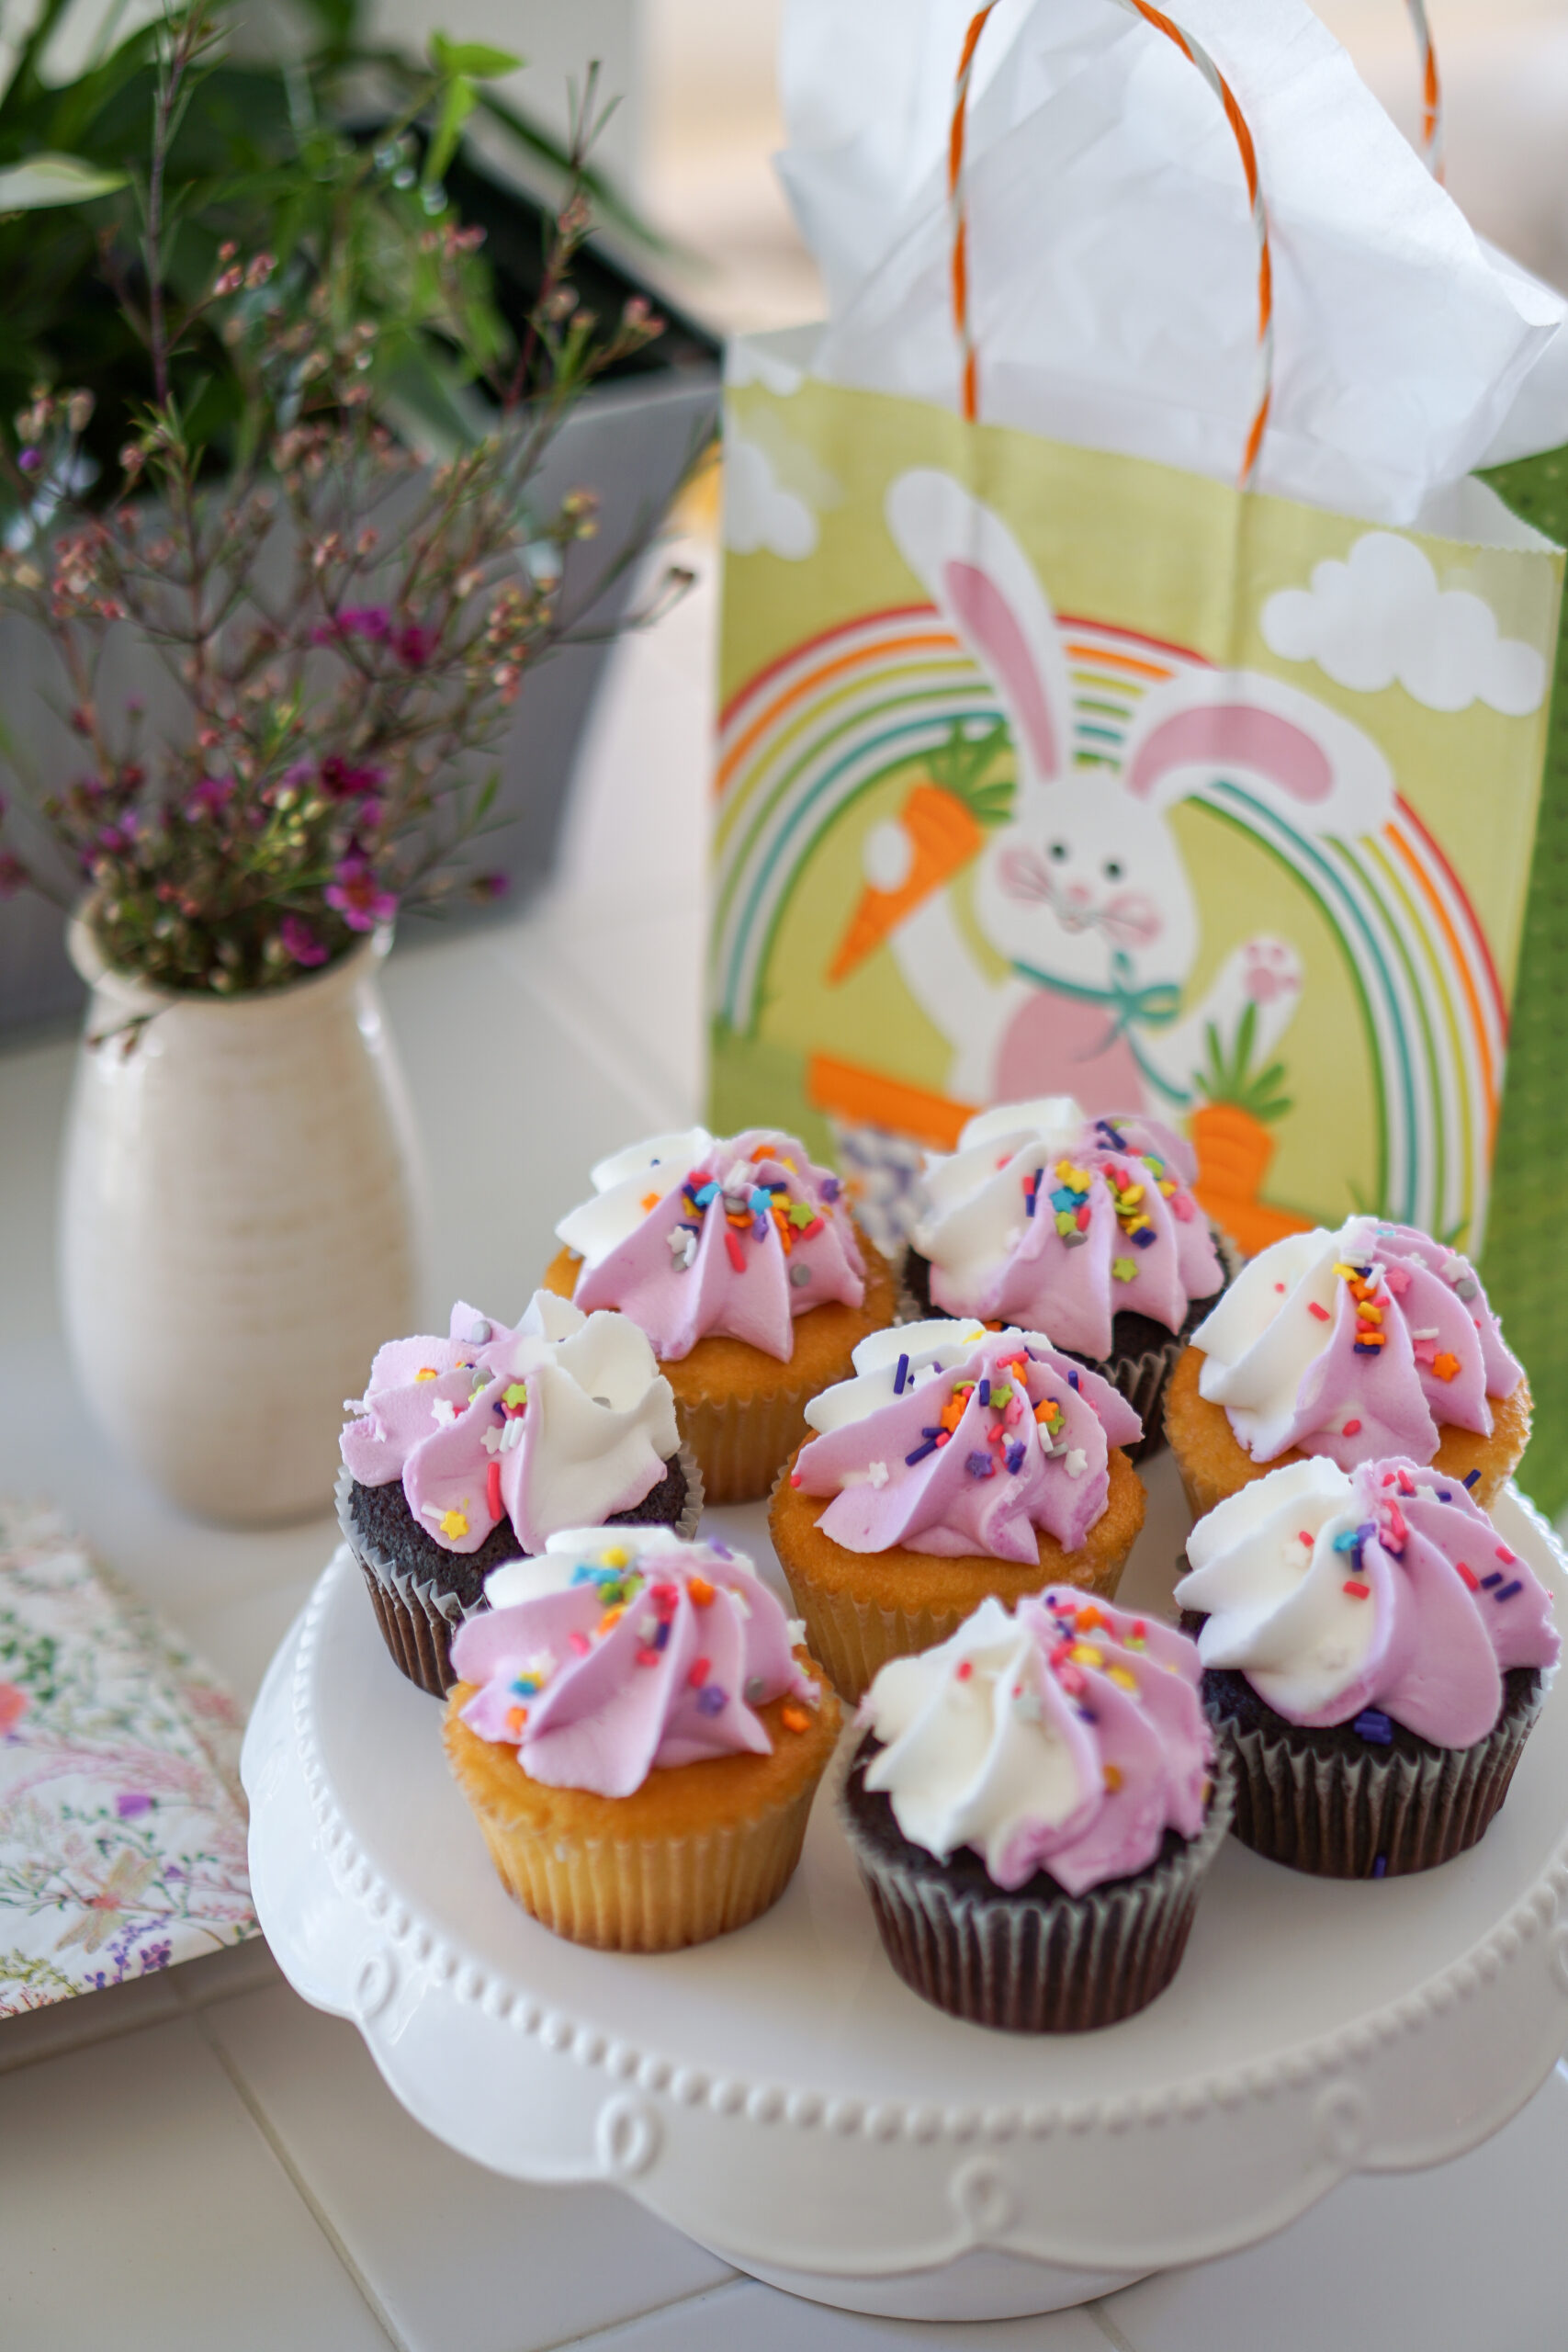 Easy and Effortless Ways to Elevate Your Easter Celebrations at Home